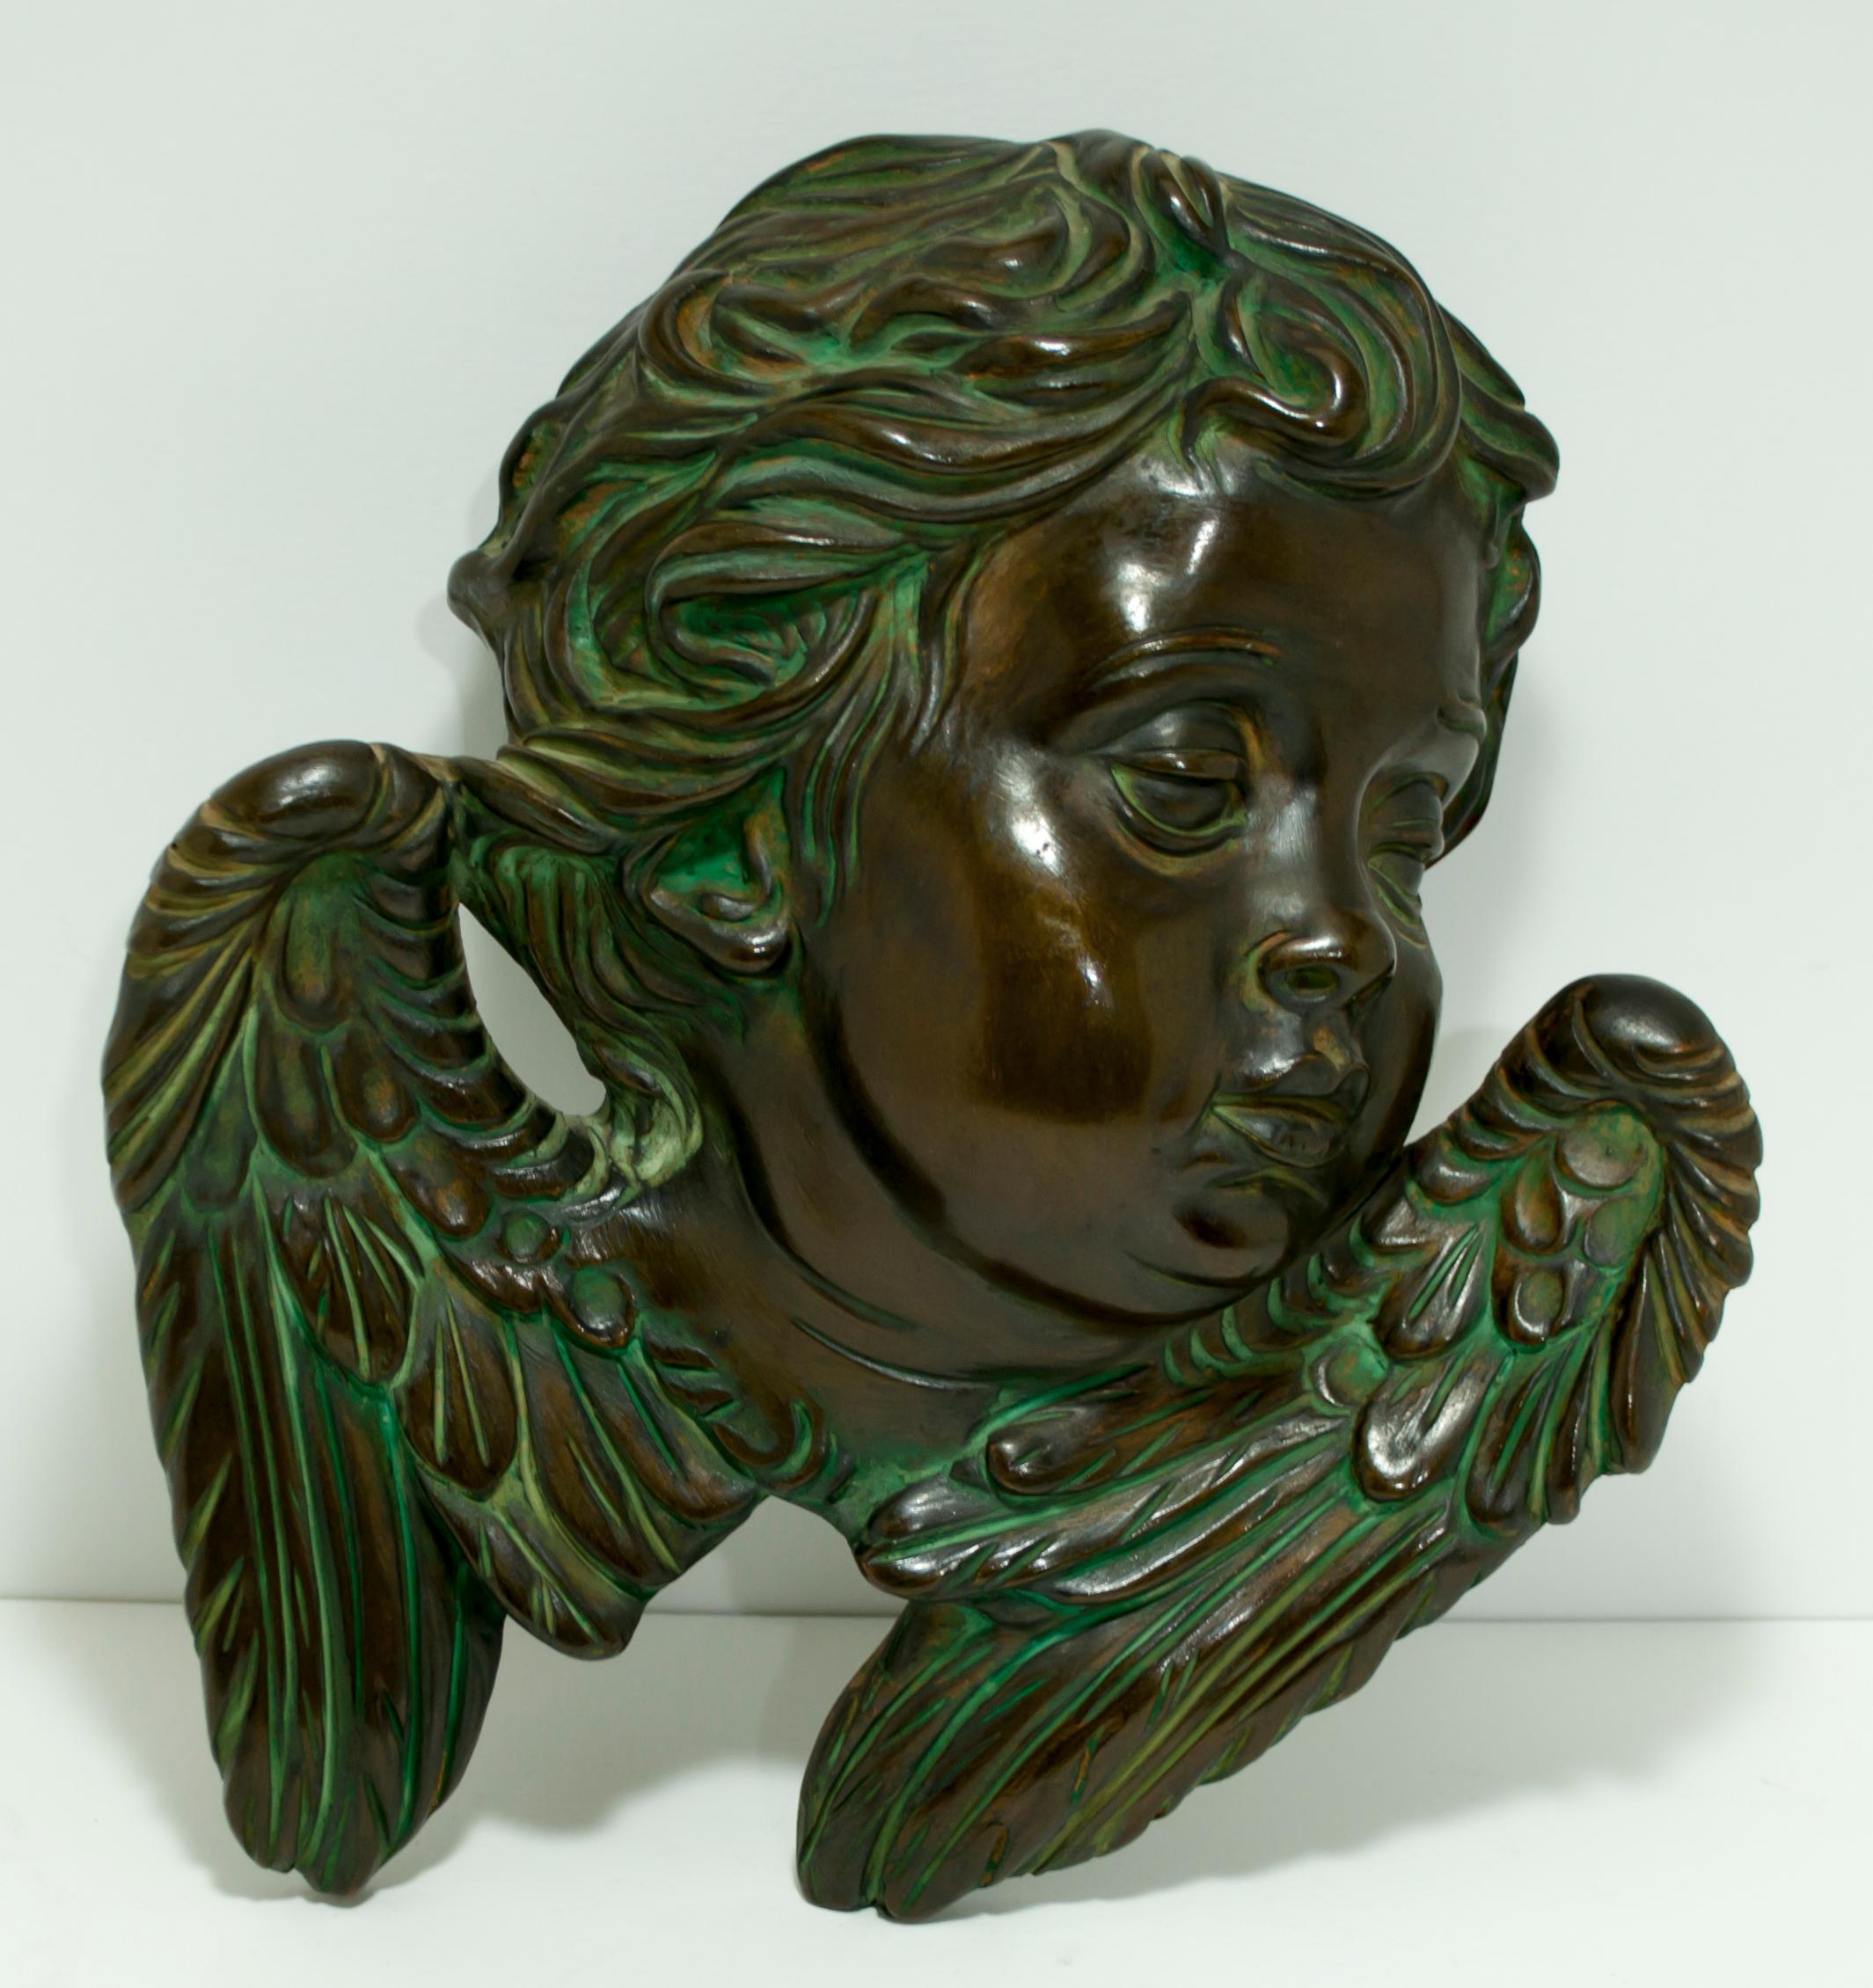 Set of 4 wall cherubs, in majolica ceramic with bronze effect and copper-colored finish, produced and signed by Batignani, Florence, 1950s.